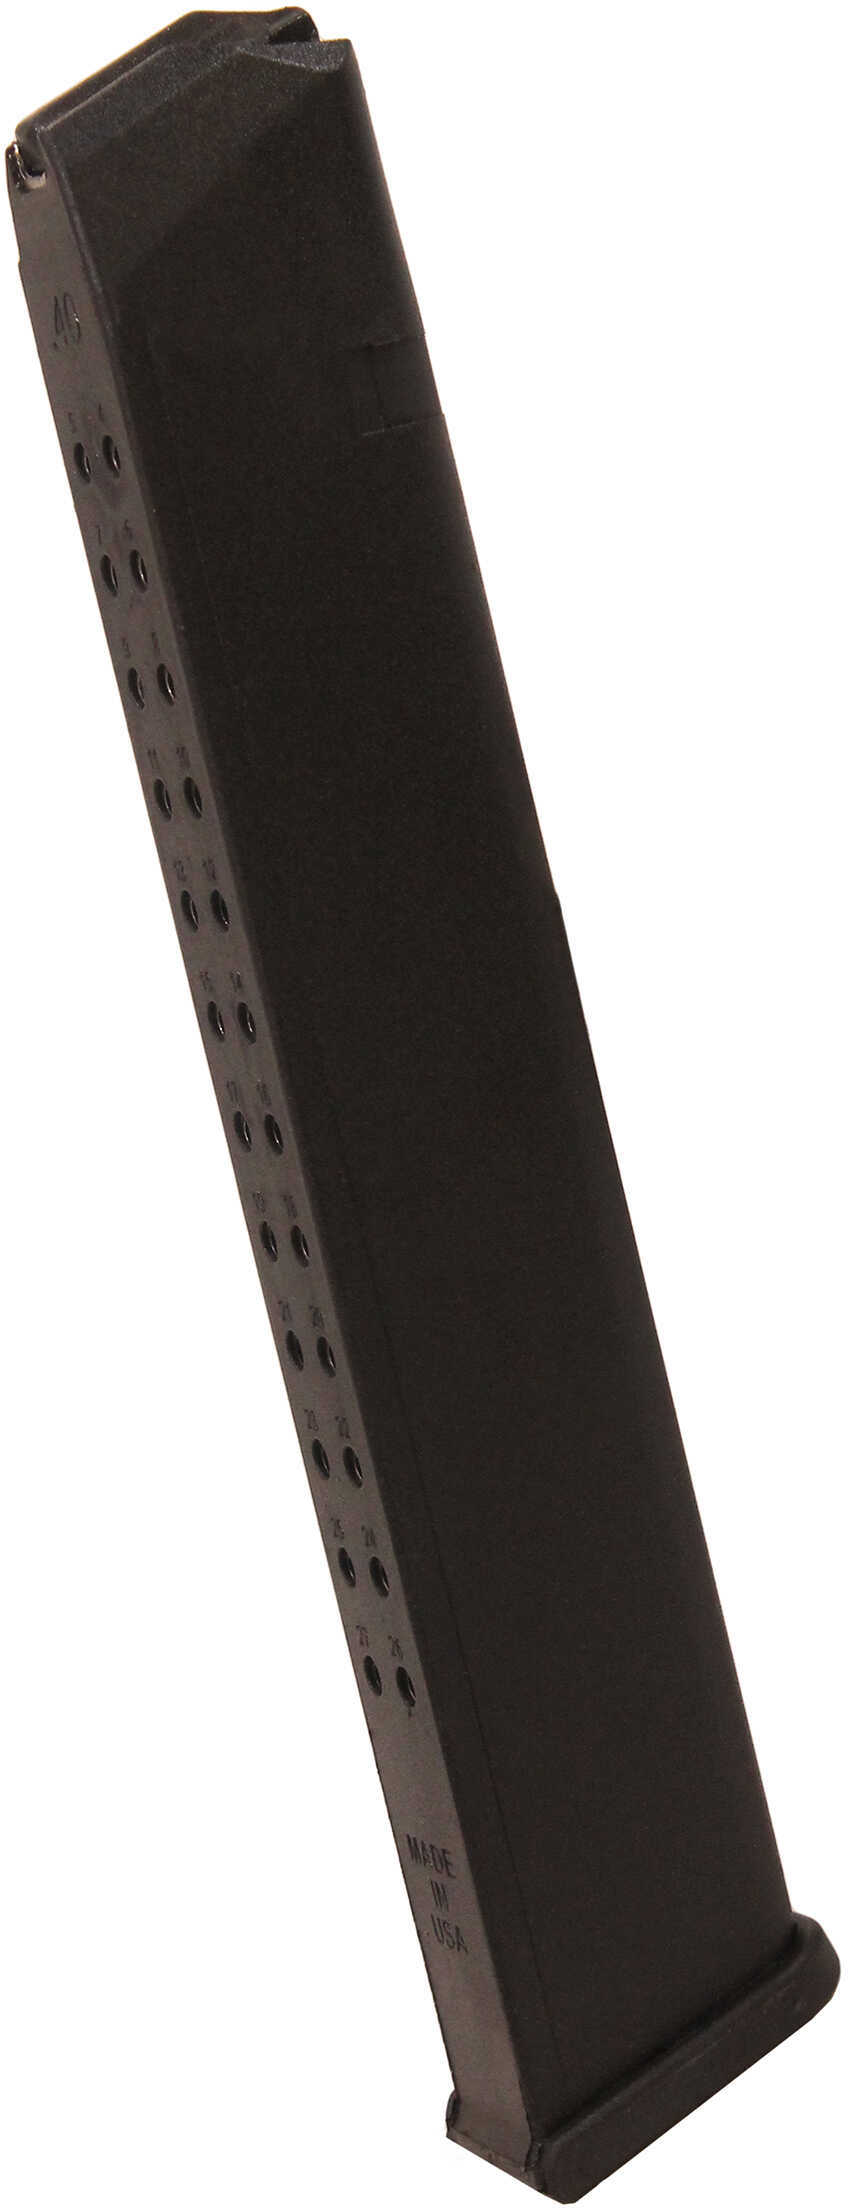 ProMag for Glock Magazine 22/23/27, .40 Smith & Wesson, 25 Rounds, Black Polymer Md: GLK-A13